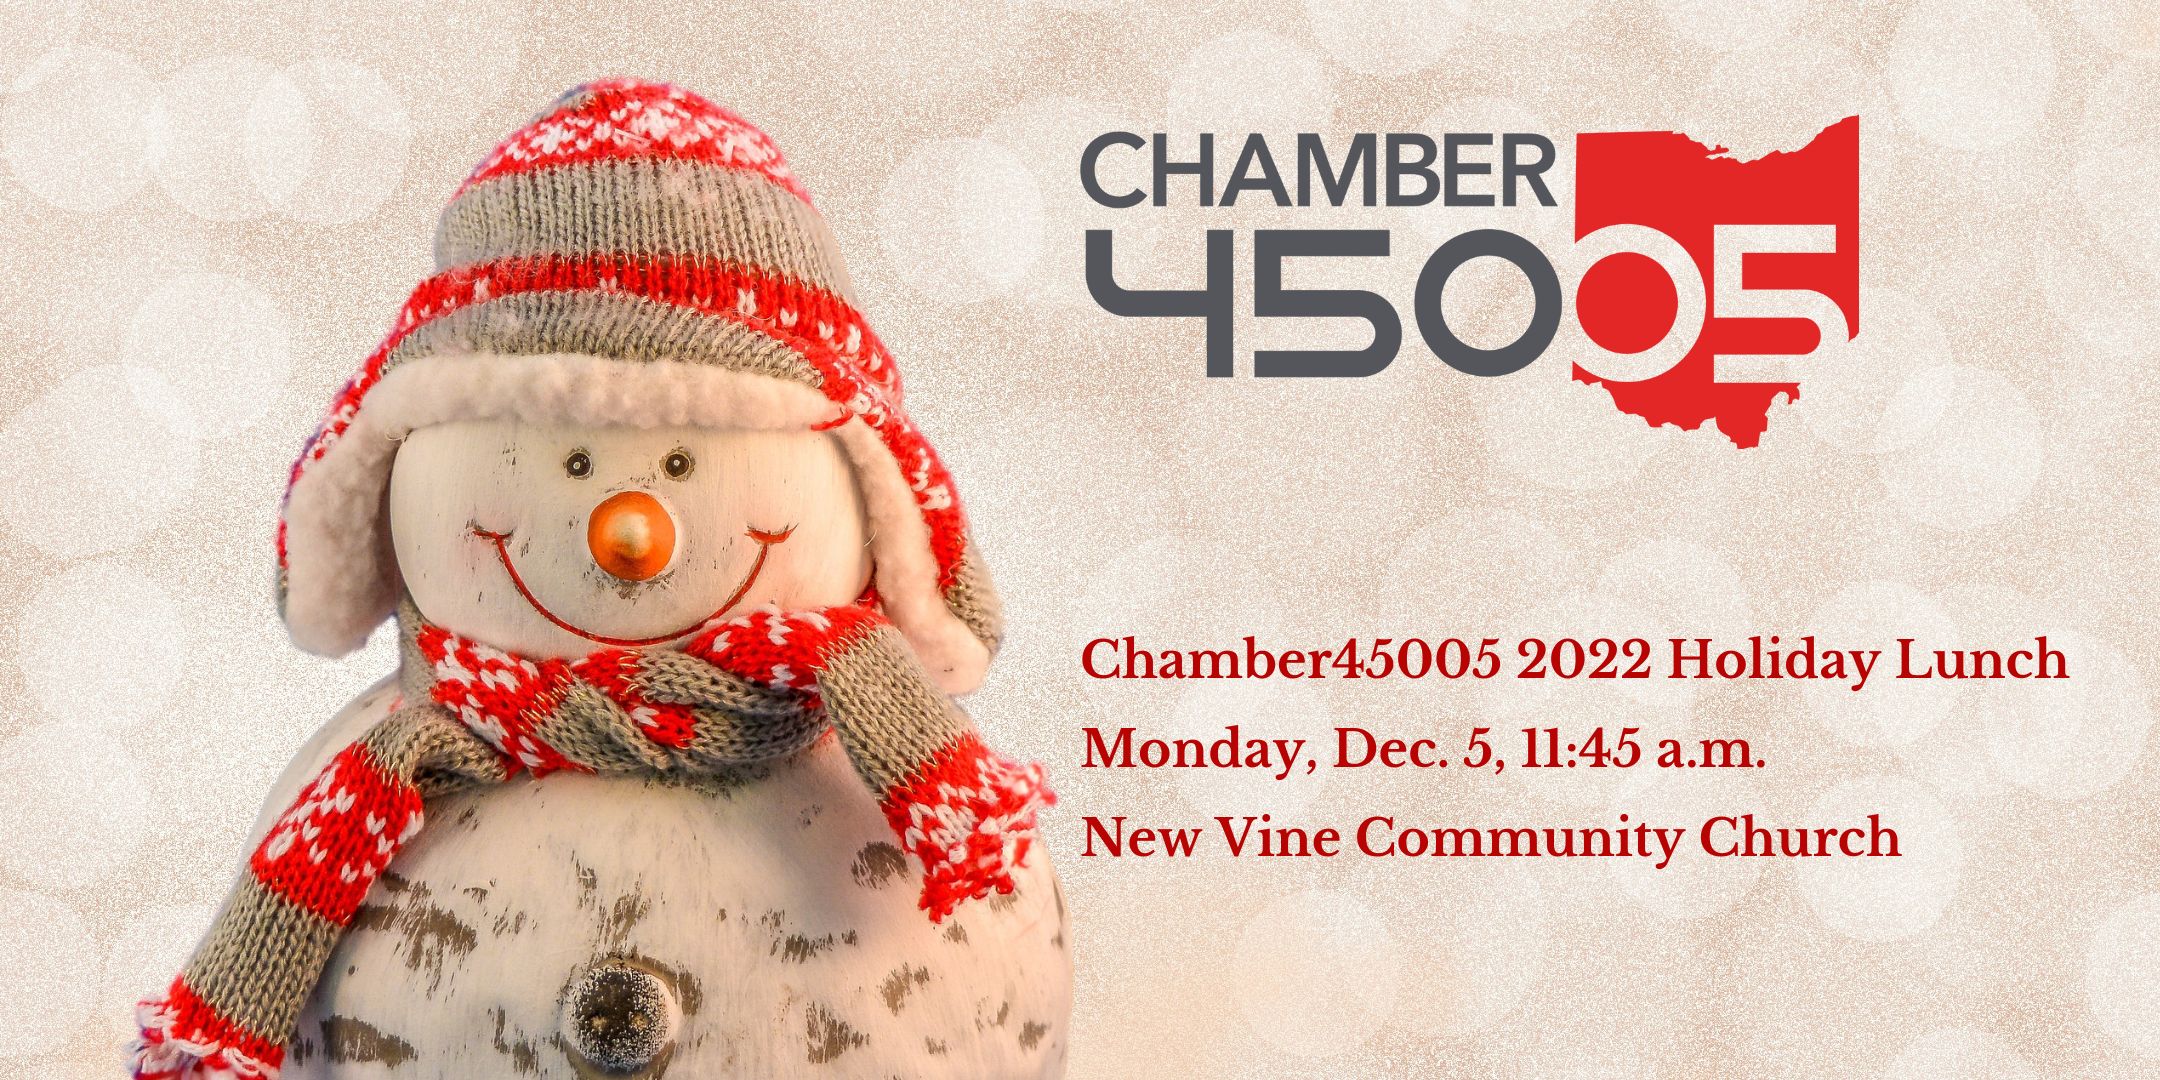 Invitation to the chamber holiday lunch